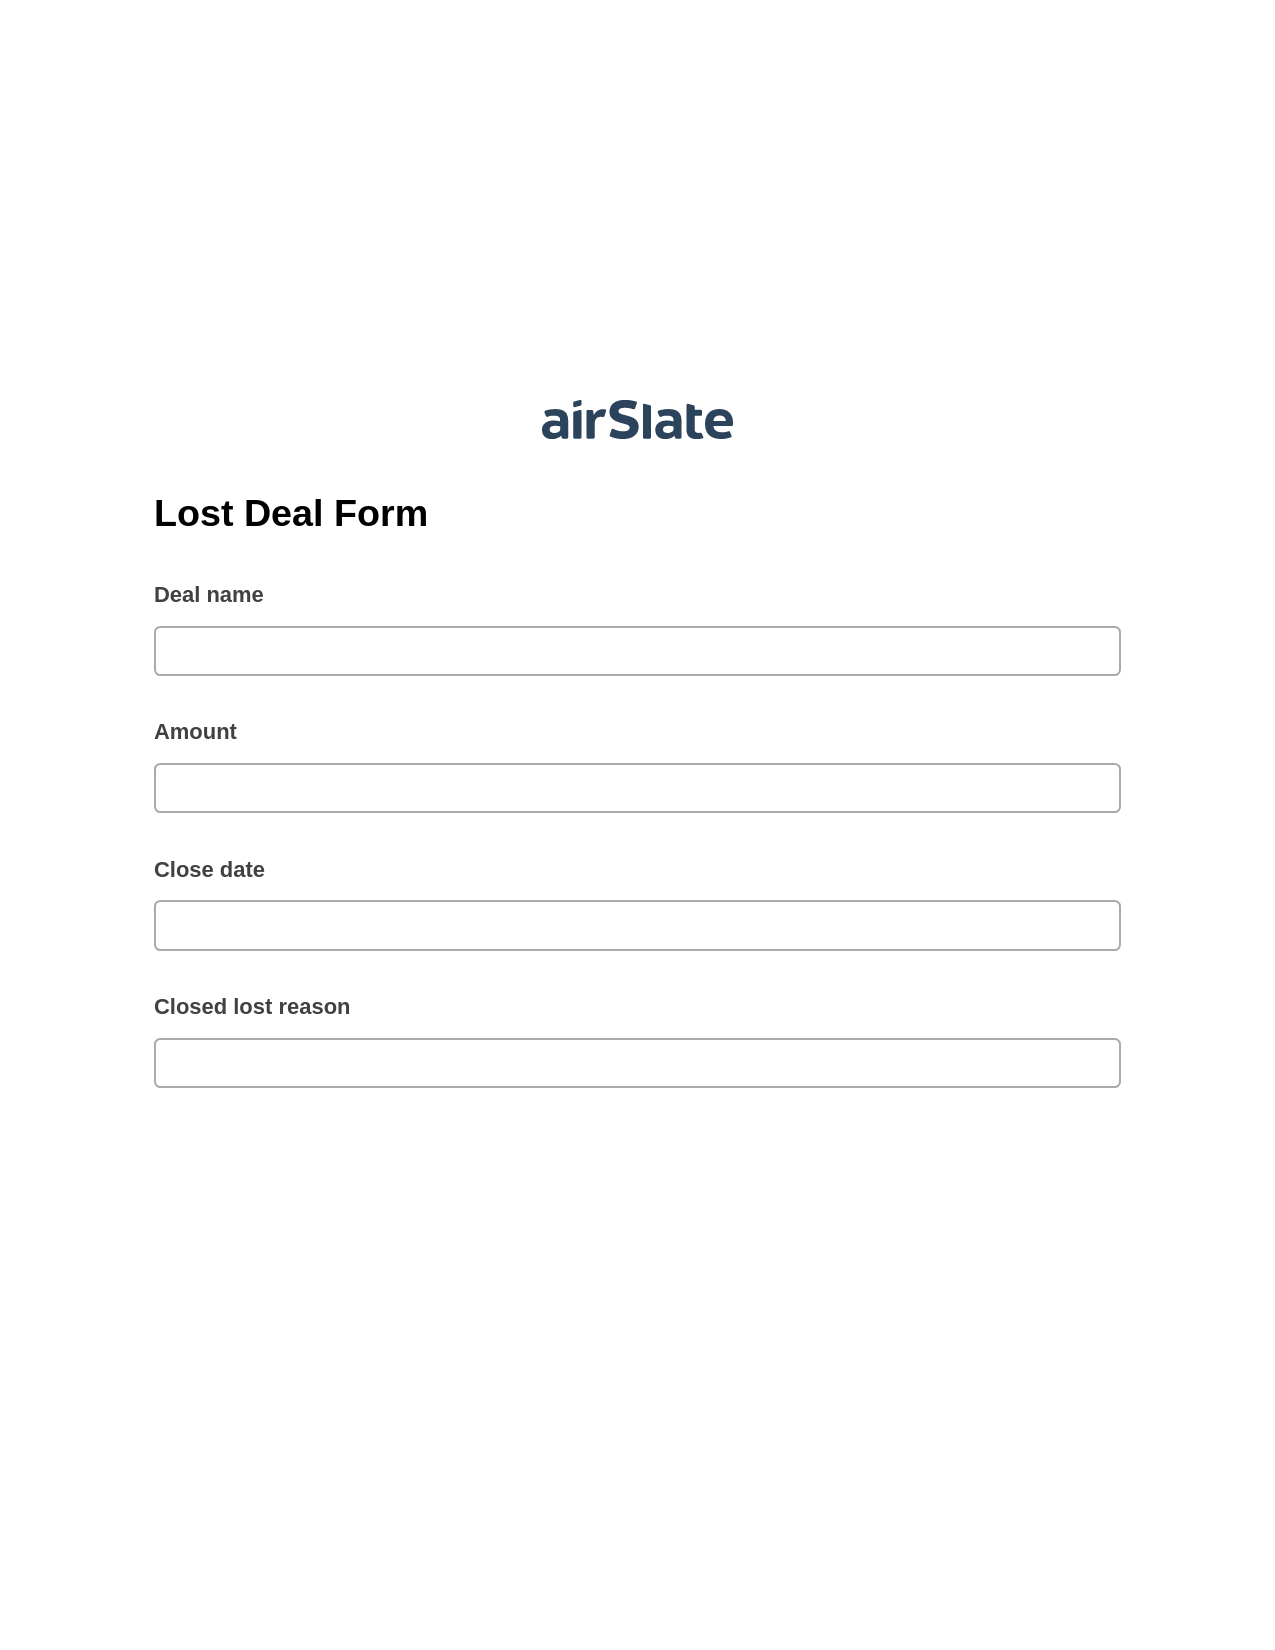 Multirole Lost Deal Form Pre-fill Dropdowns from Airtable, Add Tags to Slate Bot, Post-finish Document Bot